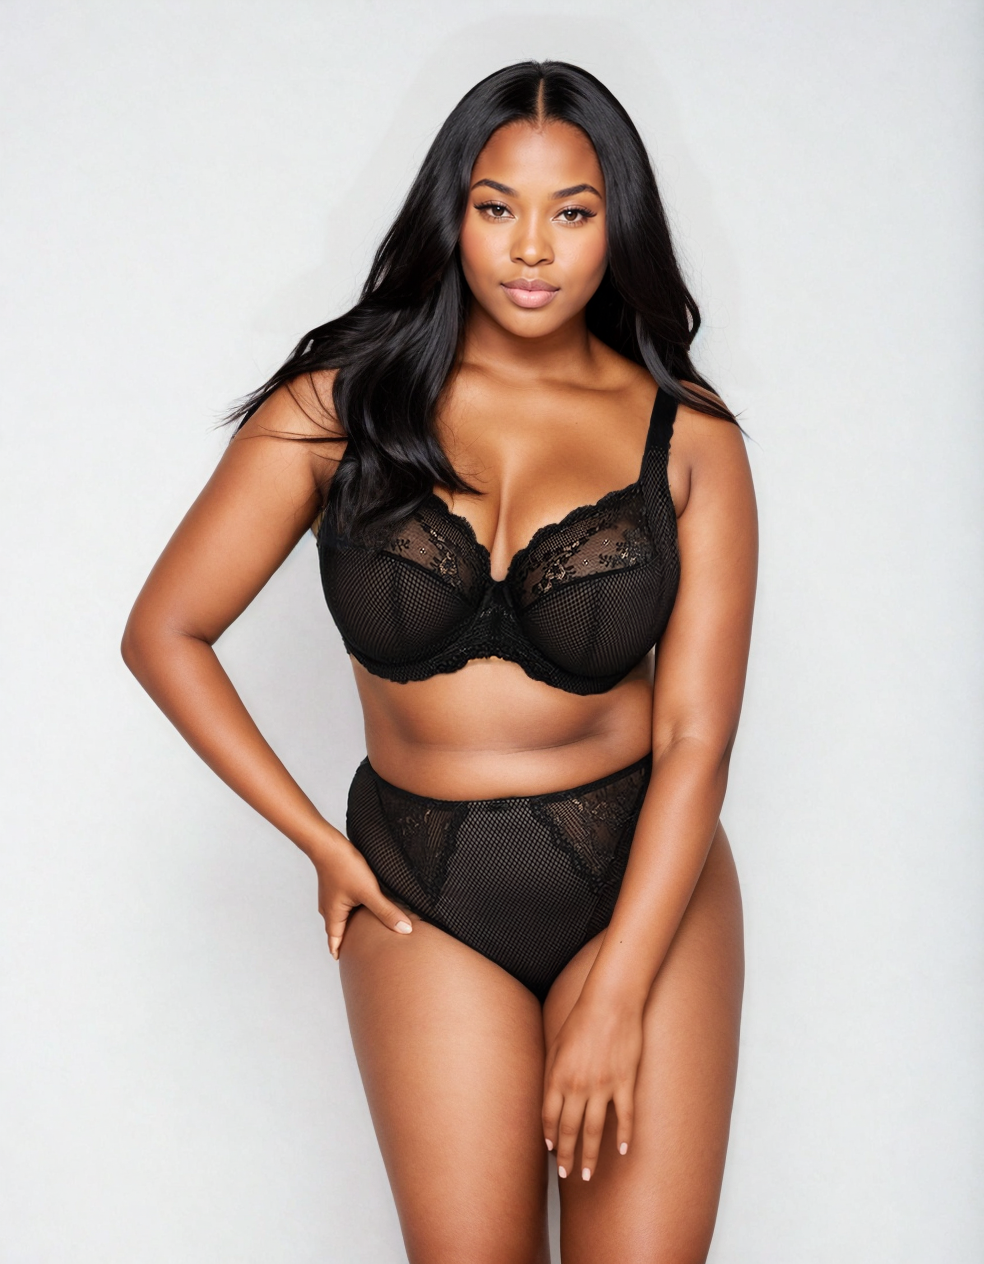 TOP RATED CHARLEY BRA, EXPECT LACE, EXPERT BRA FITTINGS